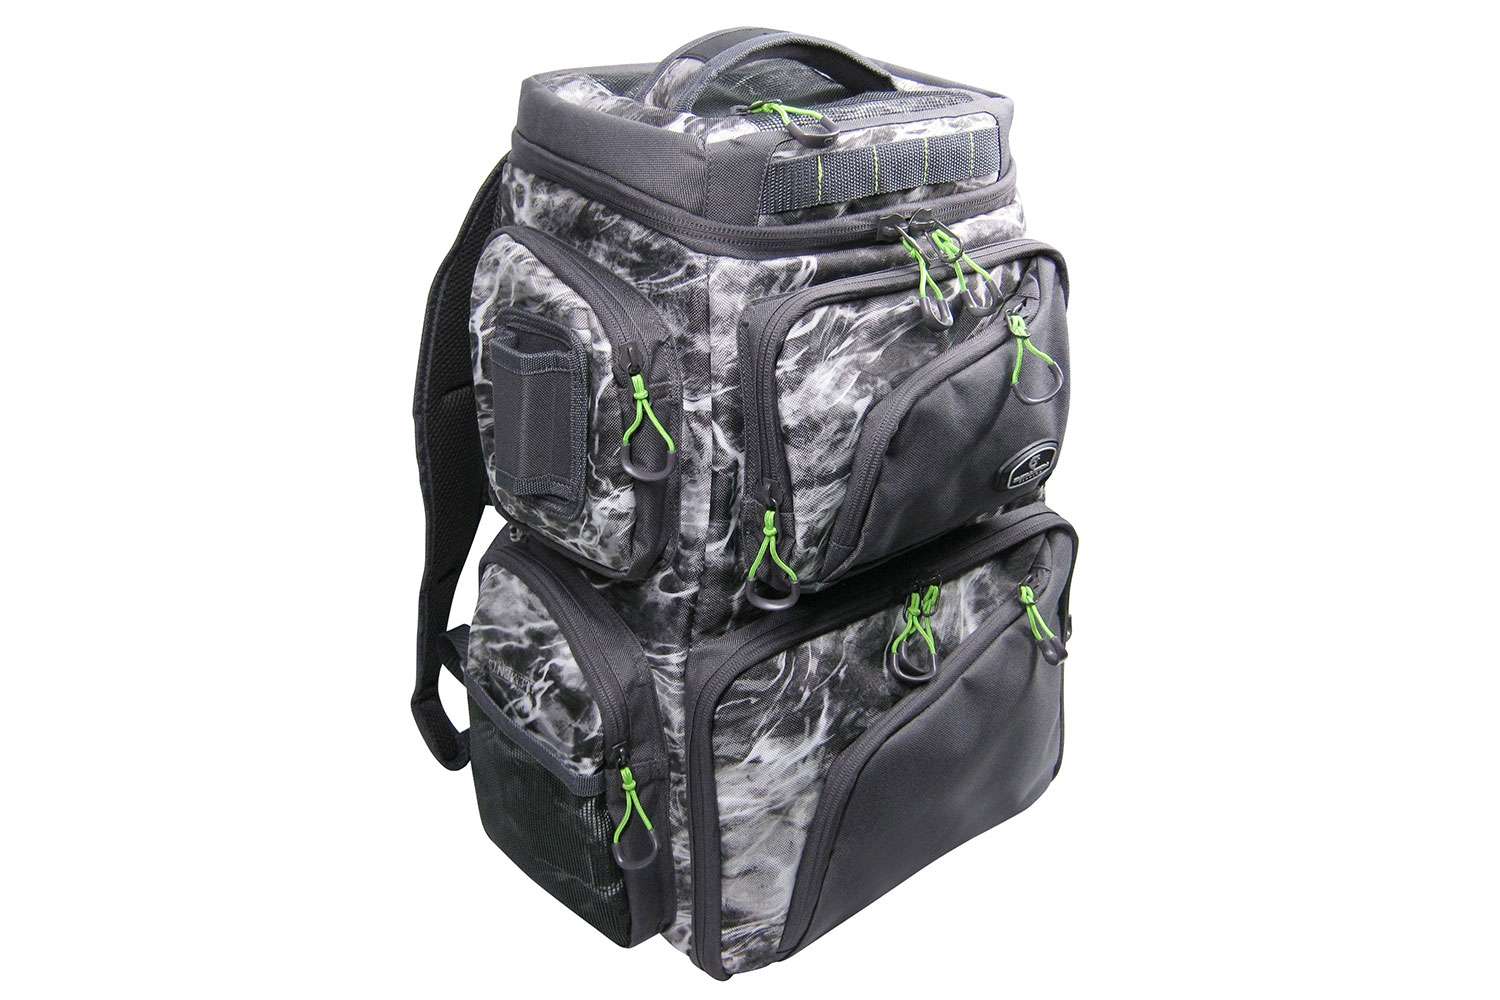     <B>Mossy Oak Large Mouth In-line Tackle Bag - 3700</B>
<BR>The bag is constructed of durable 600-denier polyester, and features in-line shape for maximum storage, a large mouth opening for quick access, gusseted exterior zipper pockets. It also comes standard with padded top-carry handle, rubberized mesh slip pocket on back side, a built-in bait binder in front gusseted zipper pocket and a removable shoulder strap. The bag holds up to six trays (3 + 3 side-by-side), includes 3 trays (3600), Mossy Oak Manta/Grey, Size: 25 1/2 x 9 x 7 3/4 inches.
<BR>
<B>MSRP: $69.99</B>
